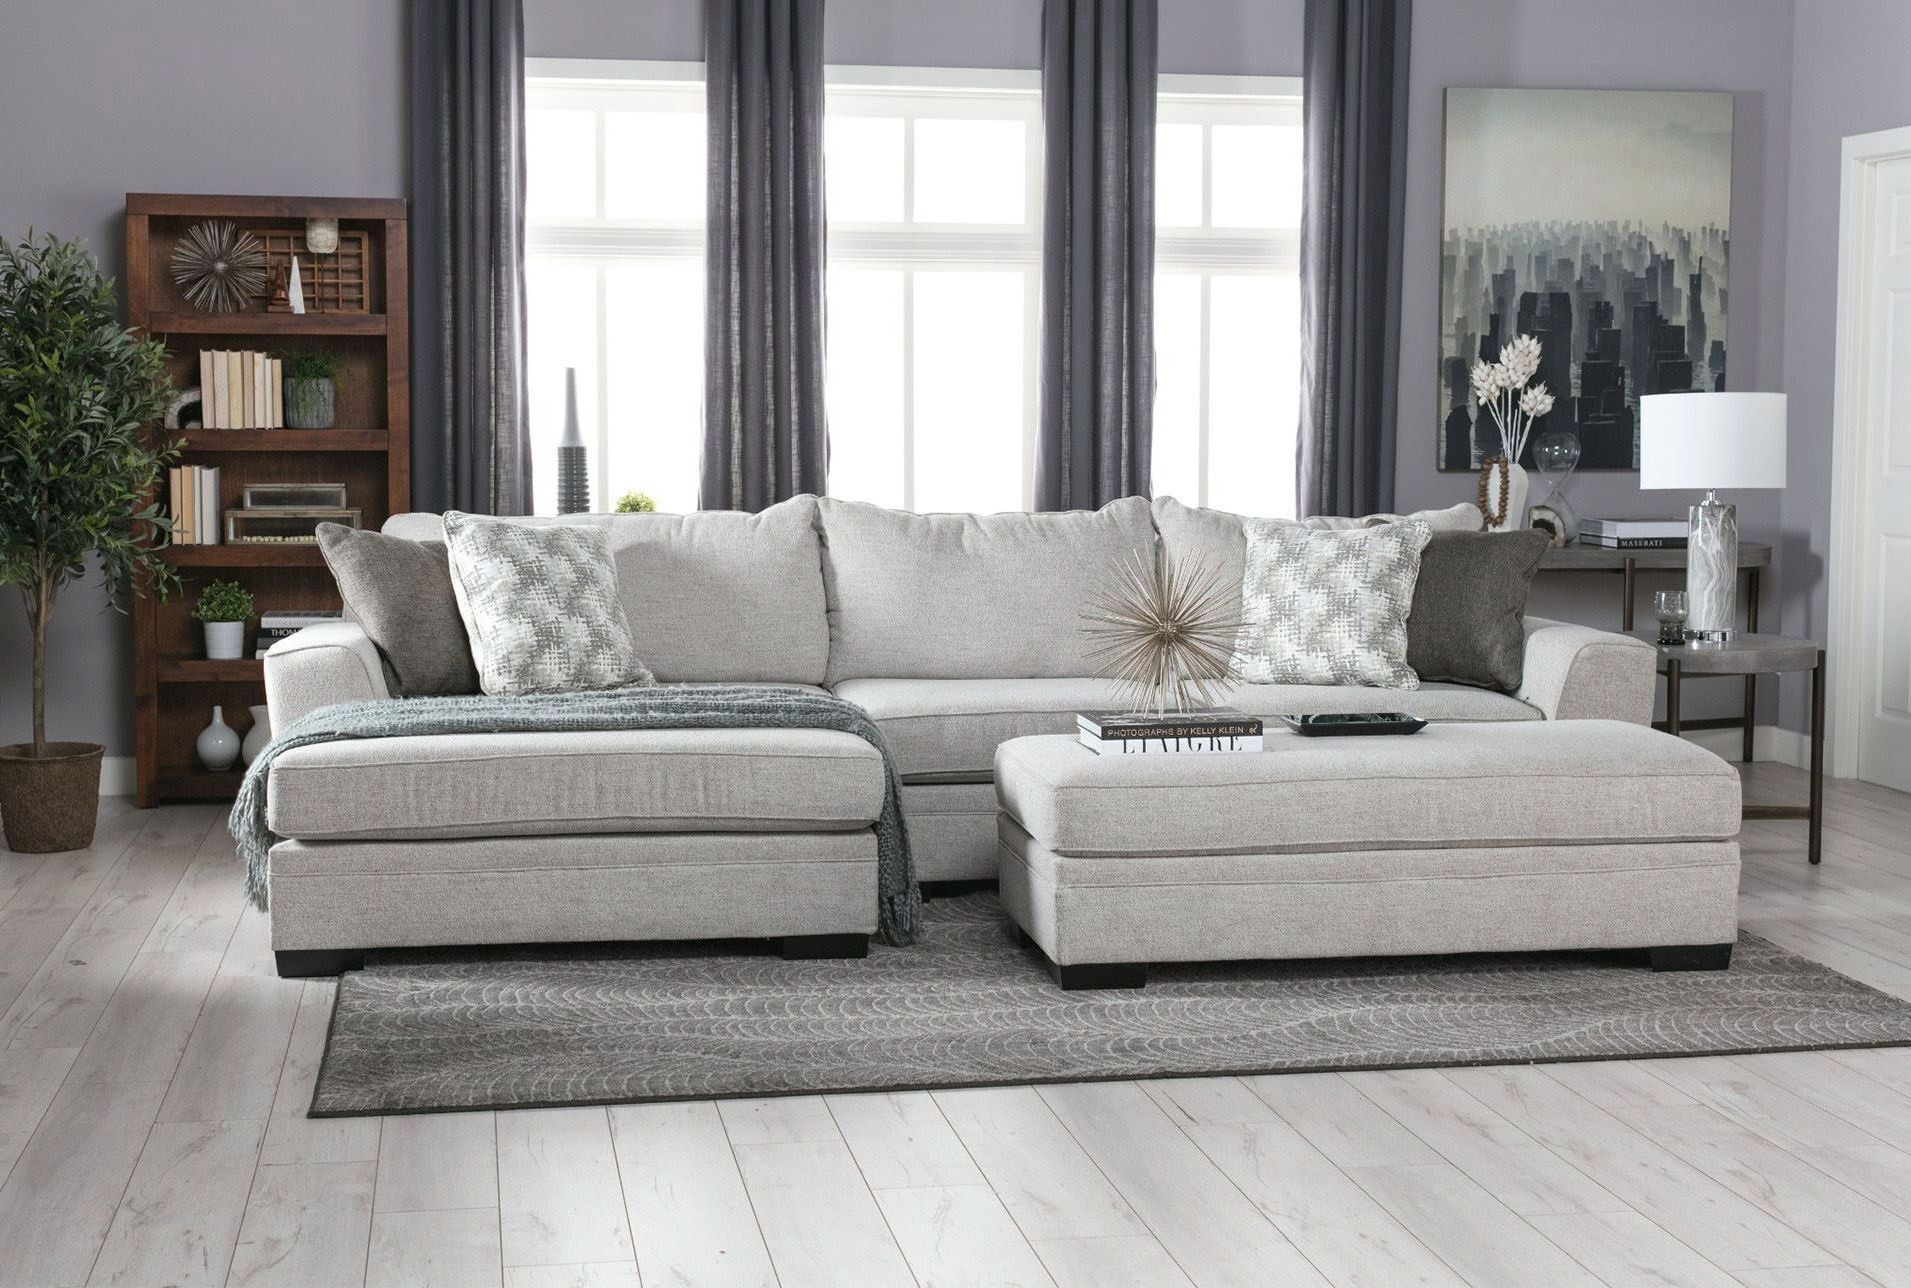 Delano 2 Piece Sectionals With Laf Oversized Chaise For Well Known Delano 2 Piece Sectional W/raf Oversized Chaise In  (View 4 of 20)